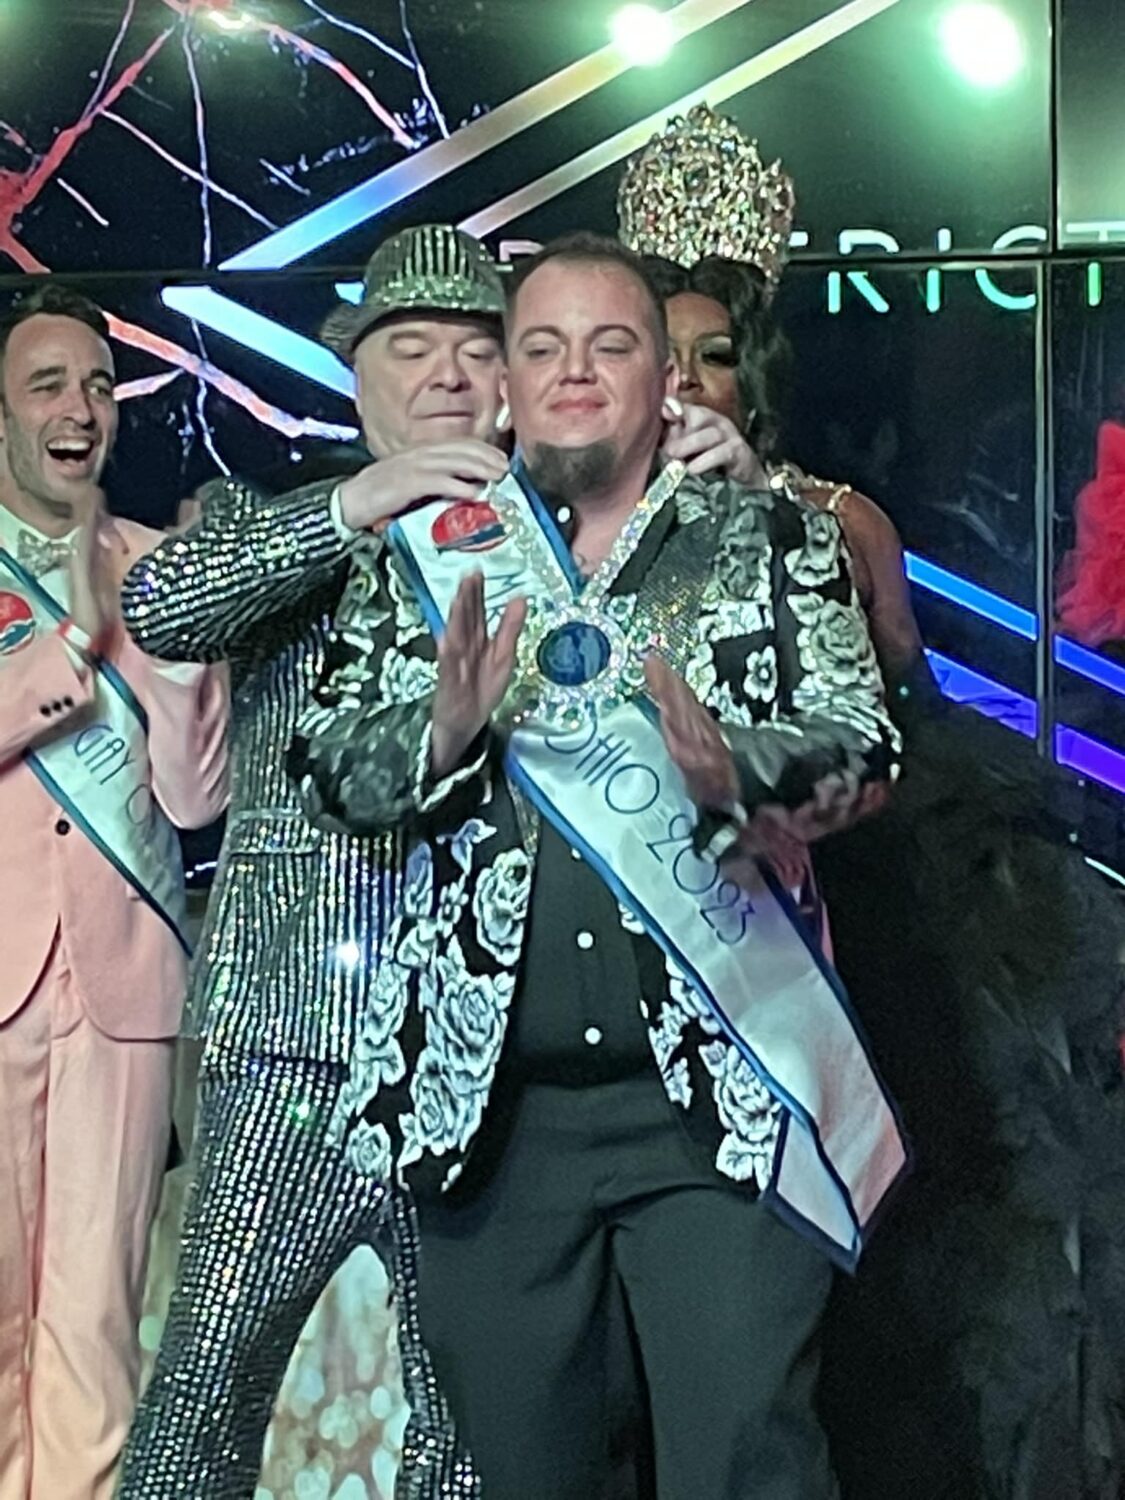 Joey Fleming medals Lukas Lane as the new Mr. Gay Ohio. Former Mr. Gay Ohio, Matthew Allen Meade (far back left), cheers in the background. | Mr. and Miss Gay Ohio | District West (Columbus, Ohio) | 9/17-9/18/2022